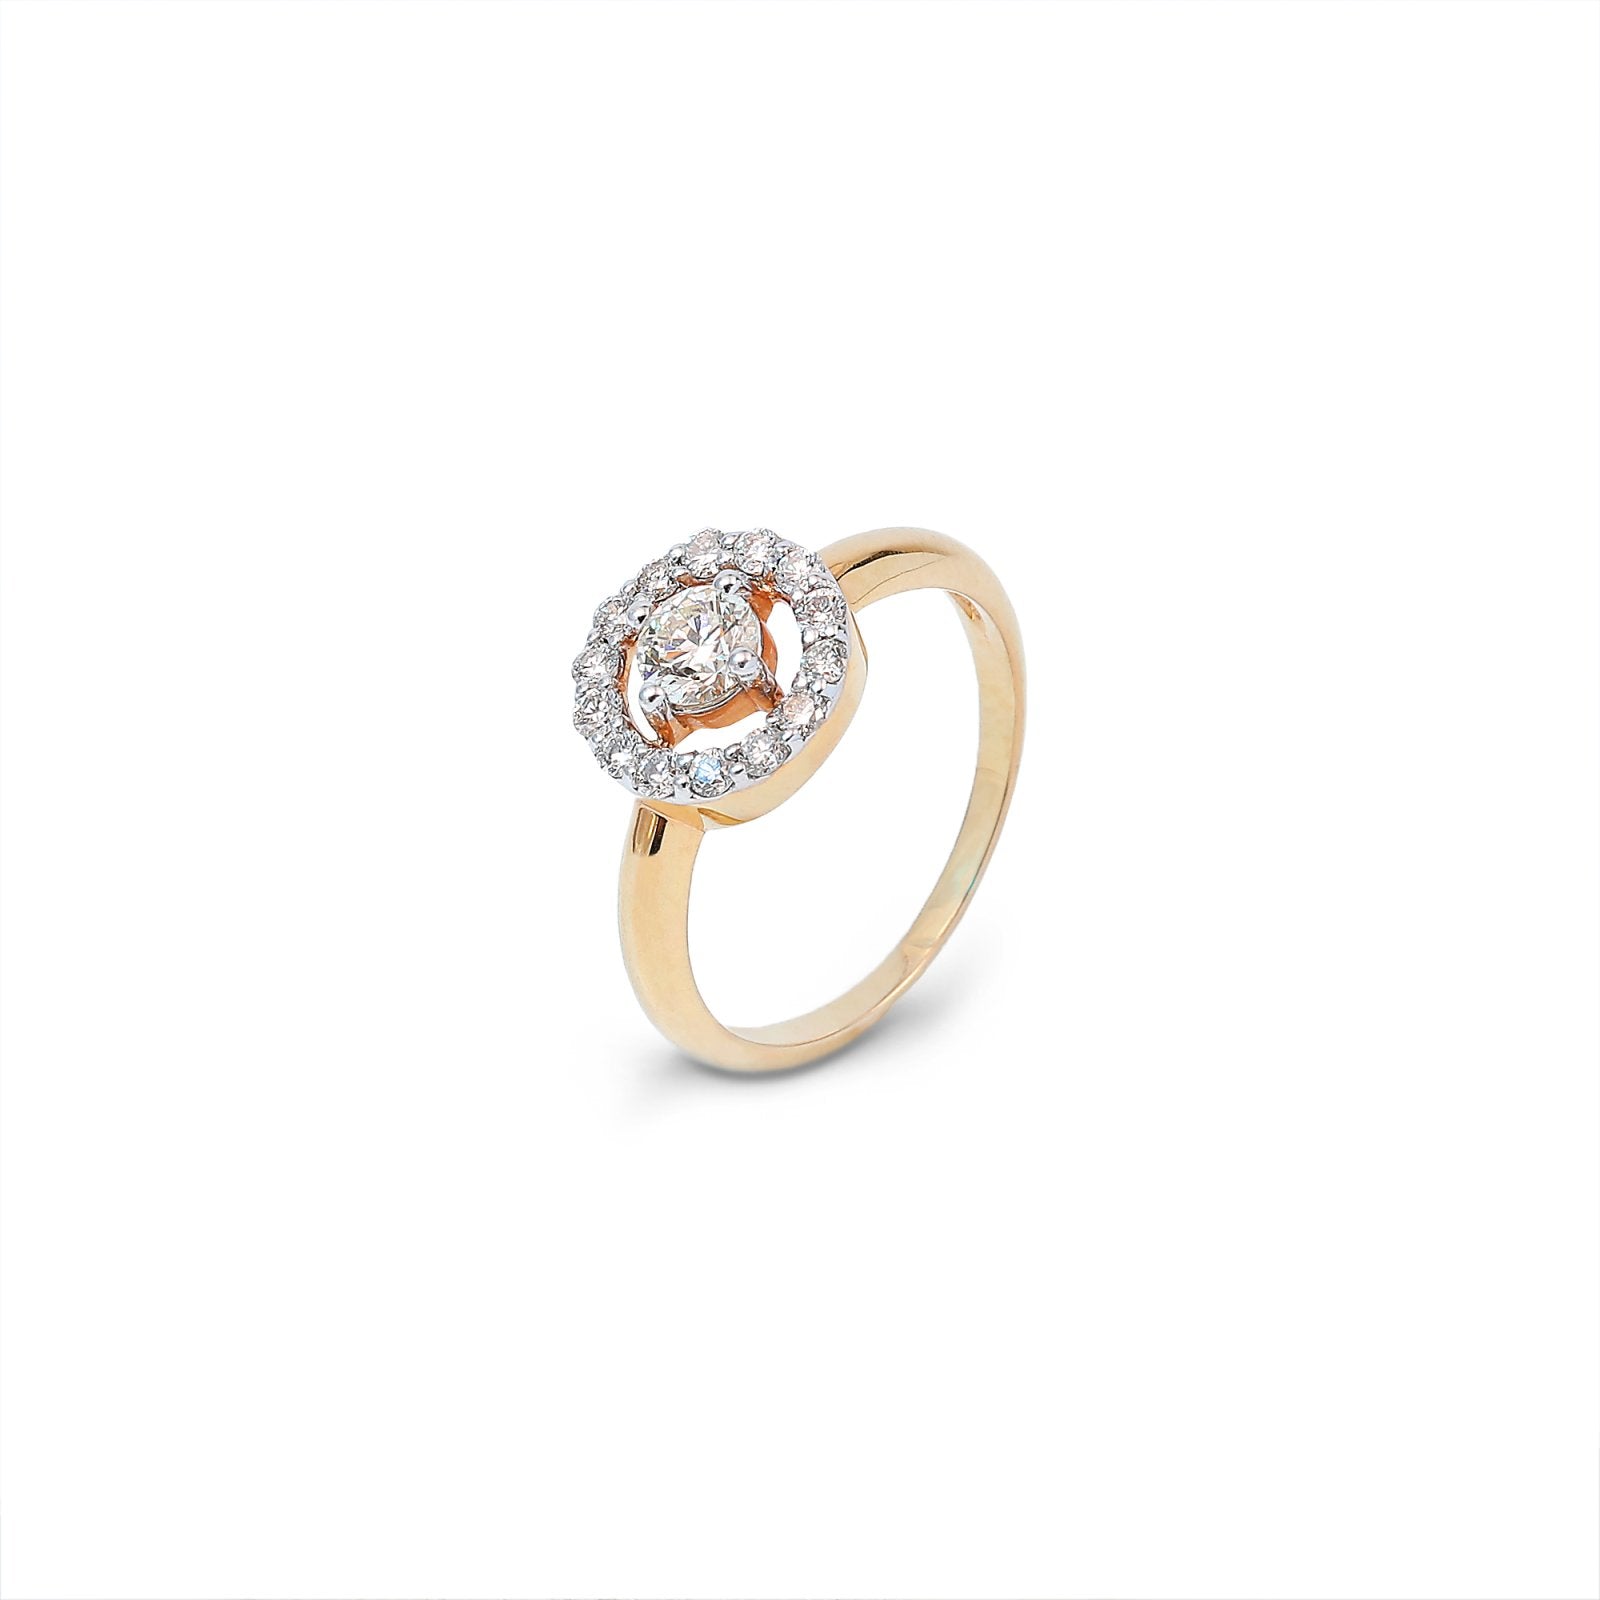 Yellow Gold Diamond Ring  setting with 14 Natural Round Diamonds in one circle and 0.3ct Single Diamonds in center TDW: 0.63ct VS HI 18k